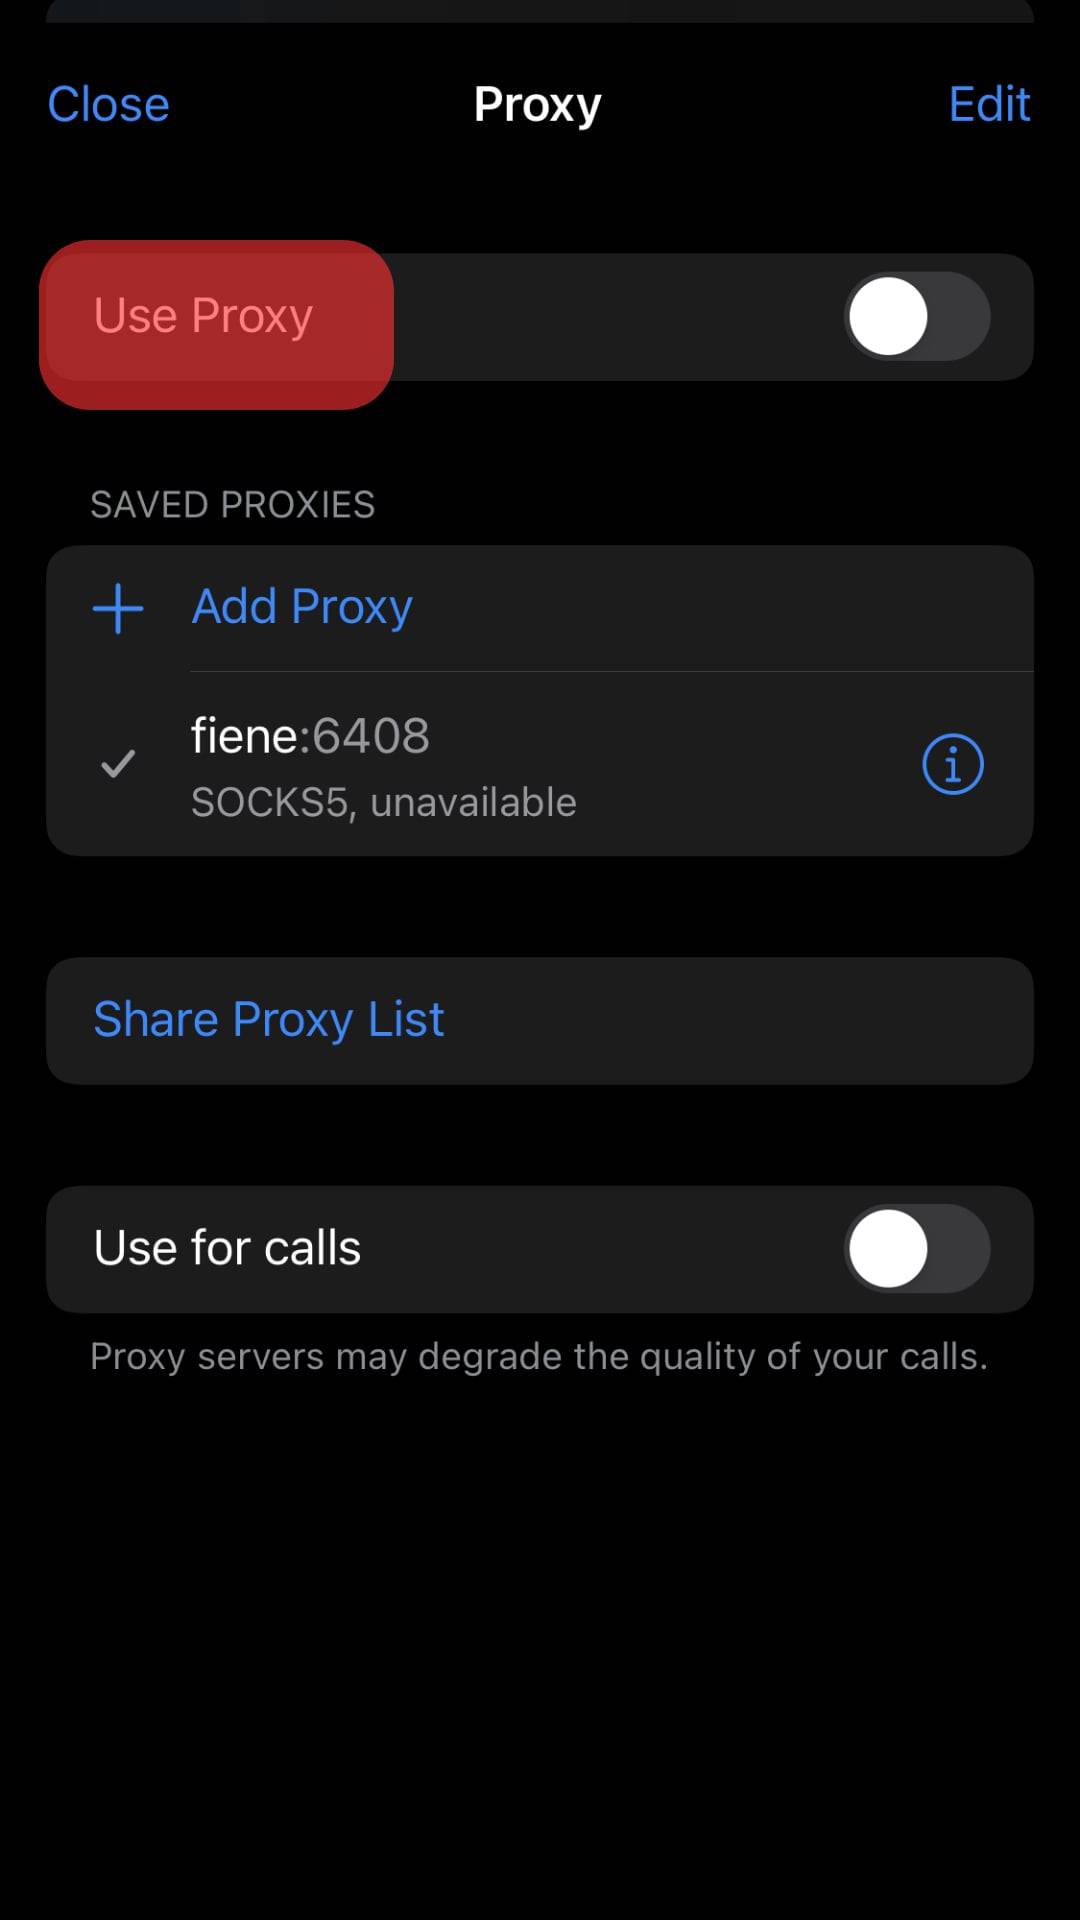 Enable Proxy By Turning On The Use Proxy Button.